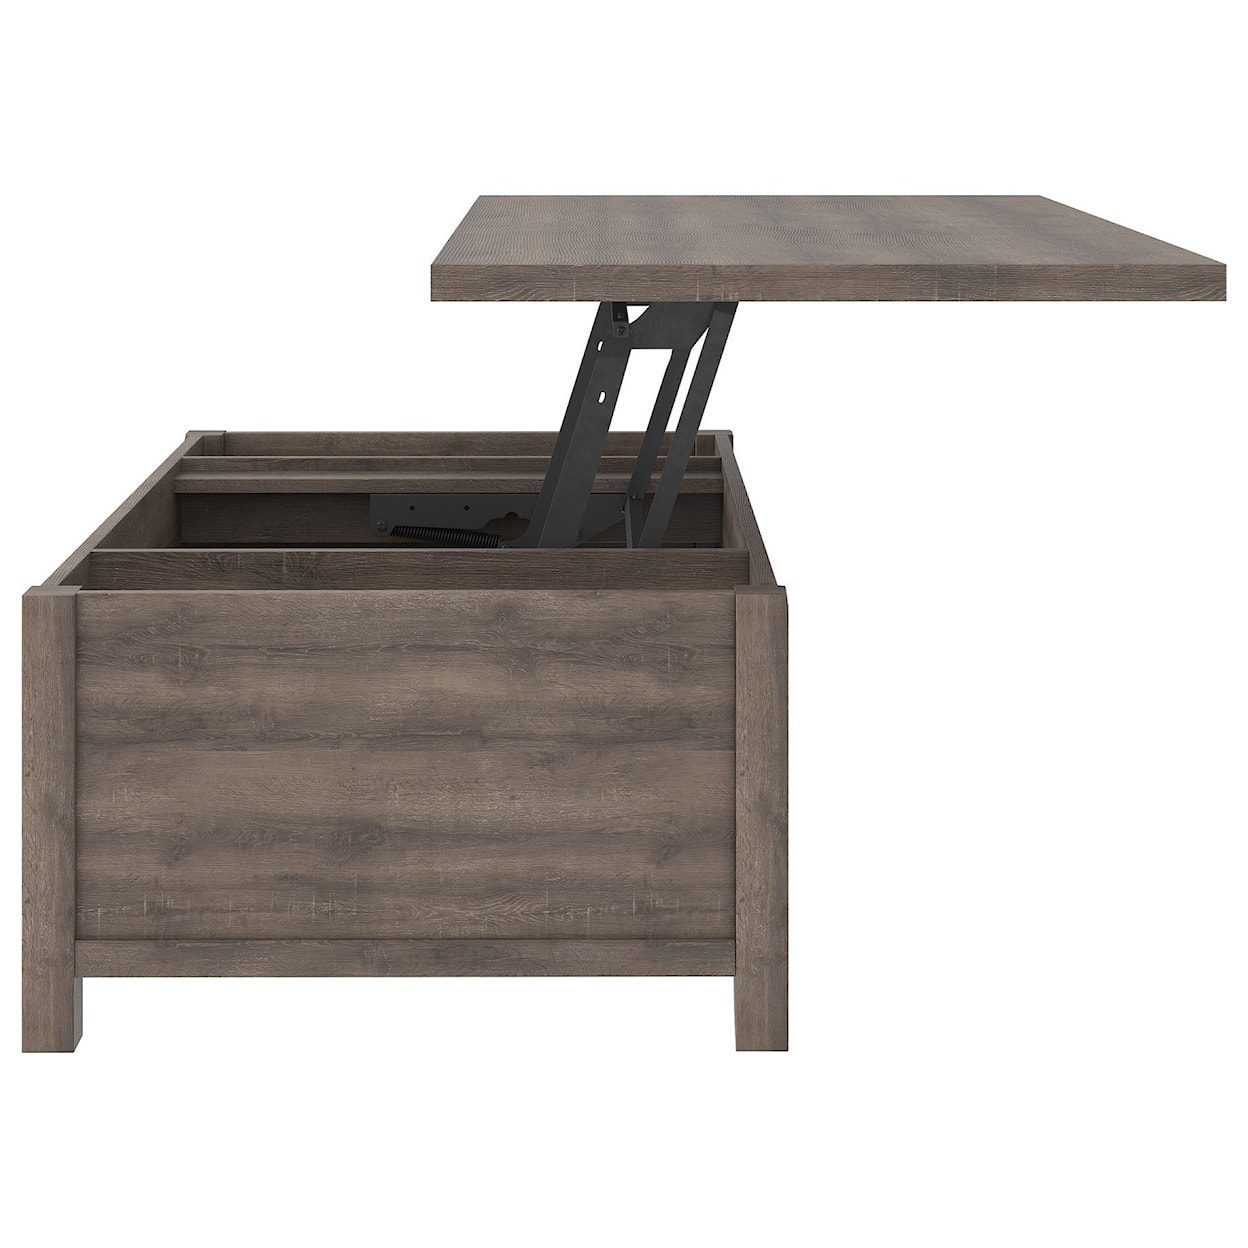 Signature Design by Ashley Furniture Arlenbry Rectangular Lift Top Cocktail Table